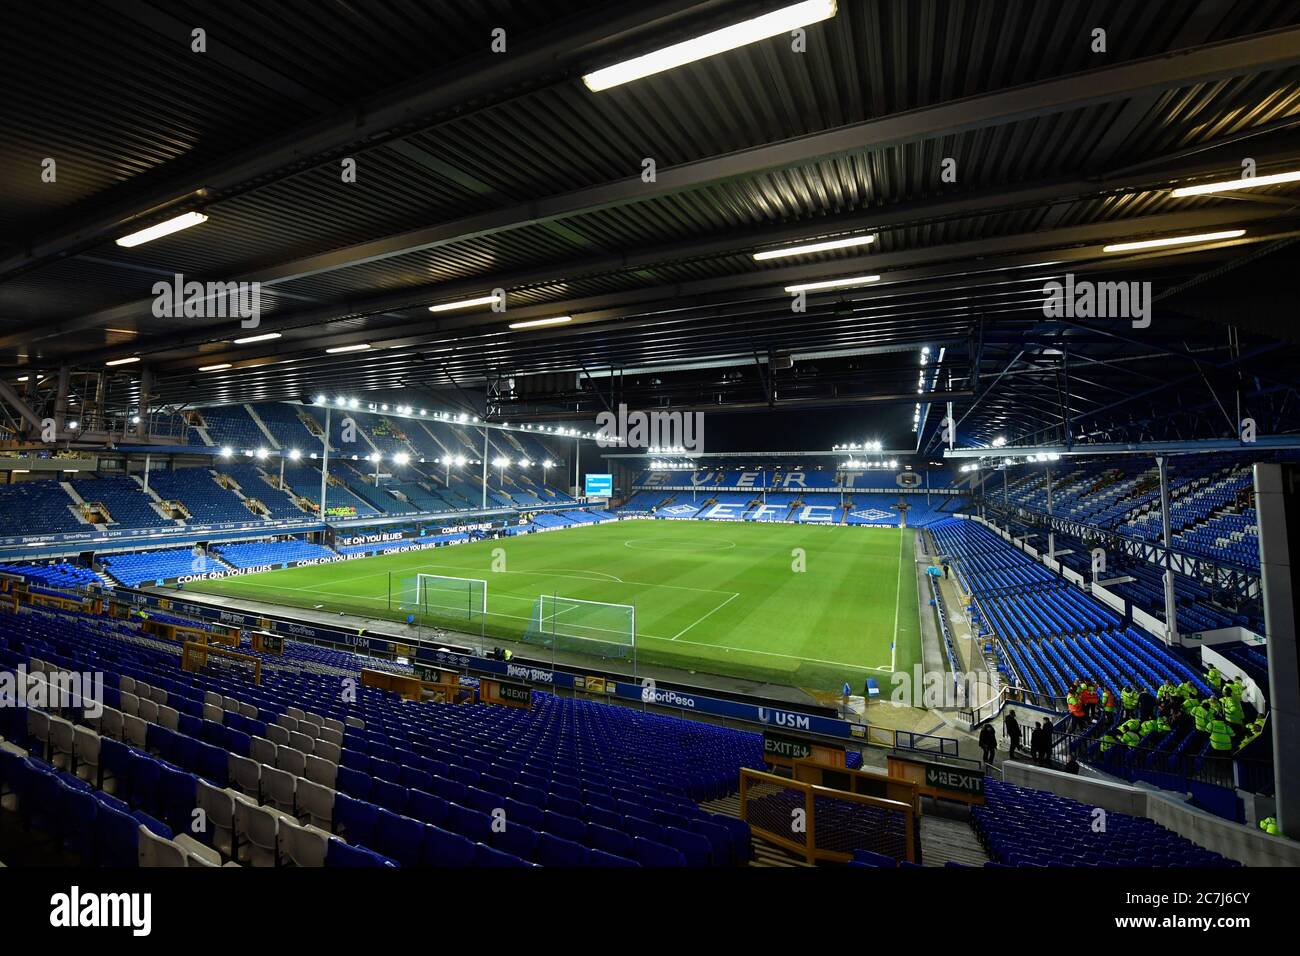 21st January 2020, Goodison Park, Liverpool, England; Premier League, Everton v Newcastle United : A general view of Goodison Park under the lights, the home of Everton Stock Photo